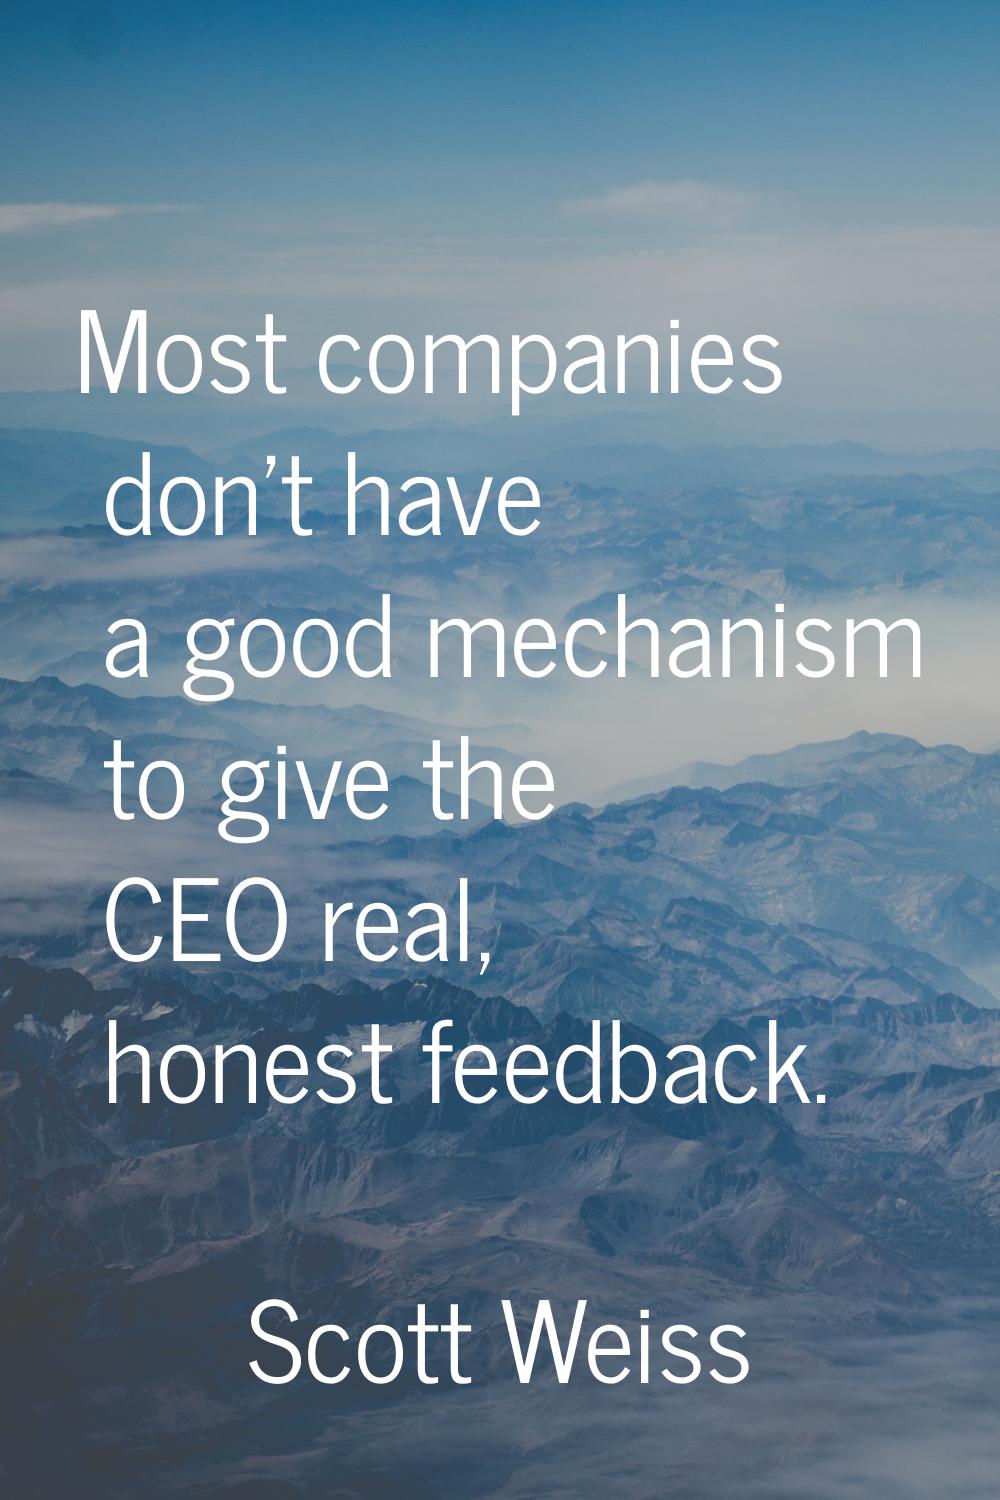 Most companies don't have a good mechanism to give the CEO real, honest feedback.